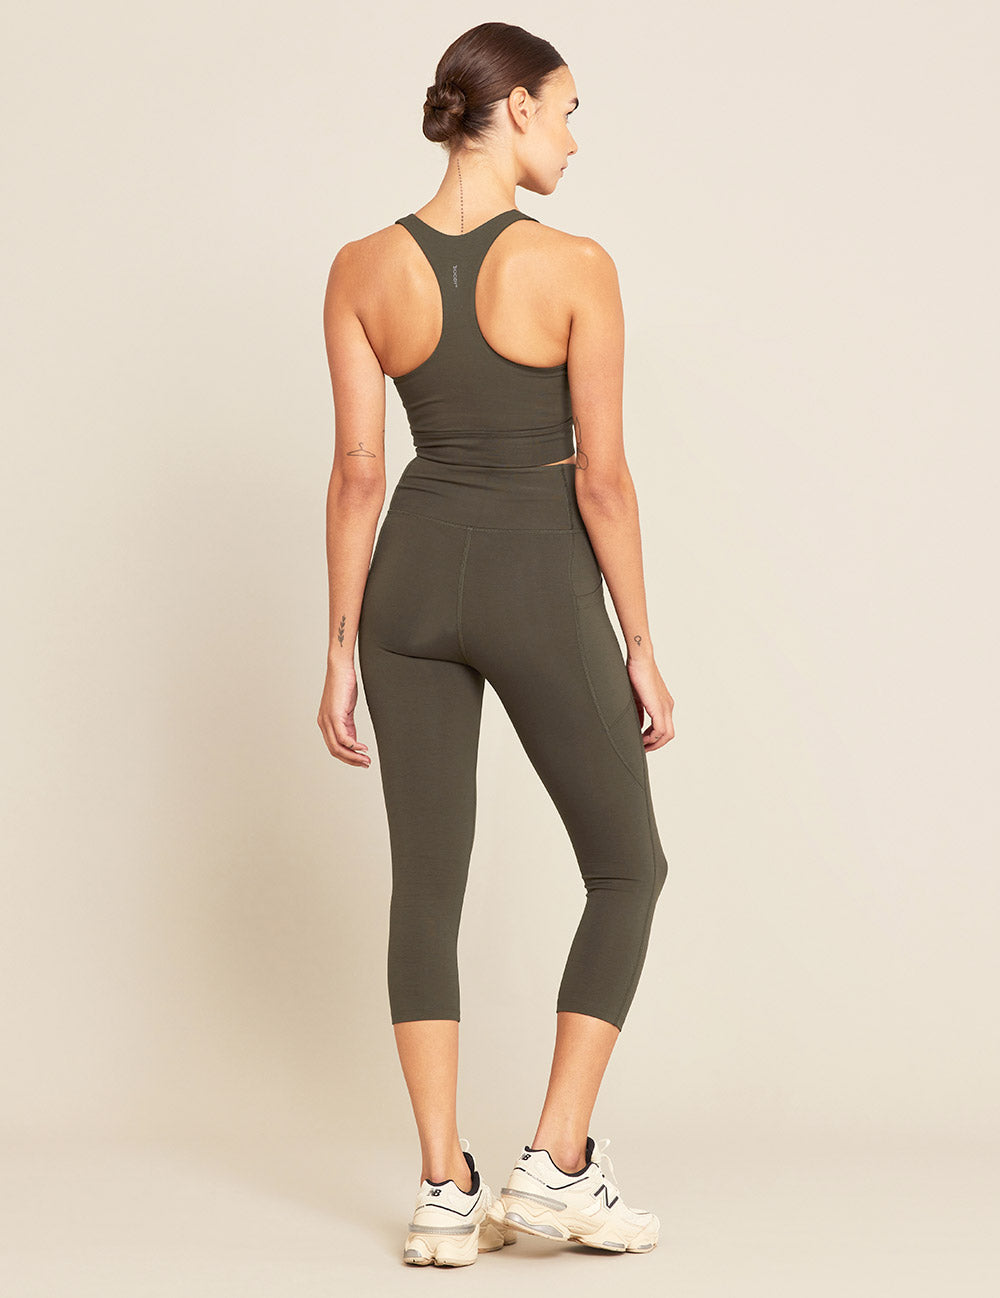 Better Bodies -Curve Scrunch Leggings are made to exaggerate your